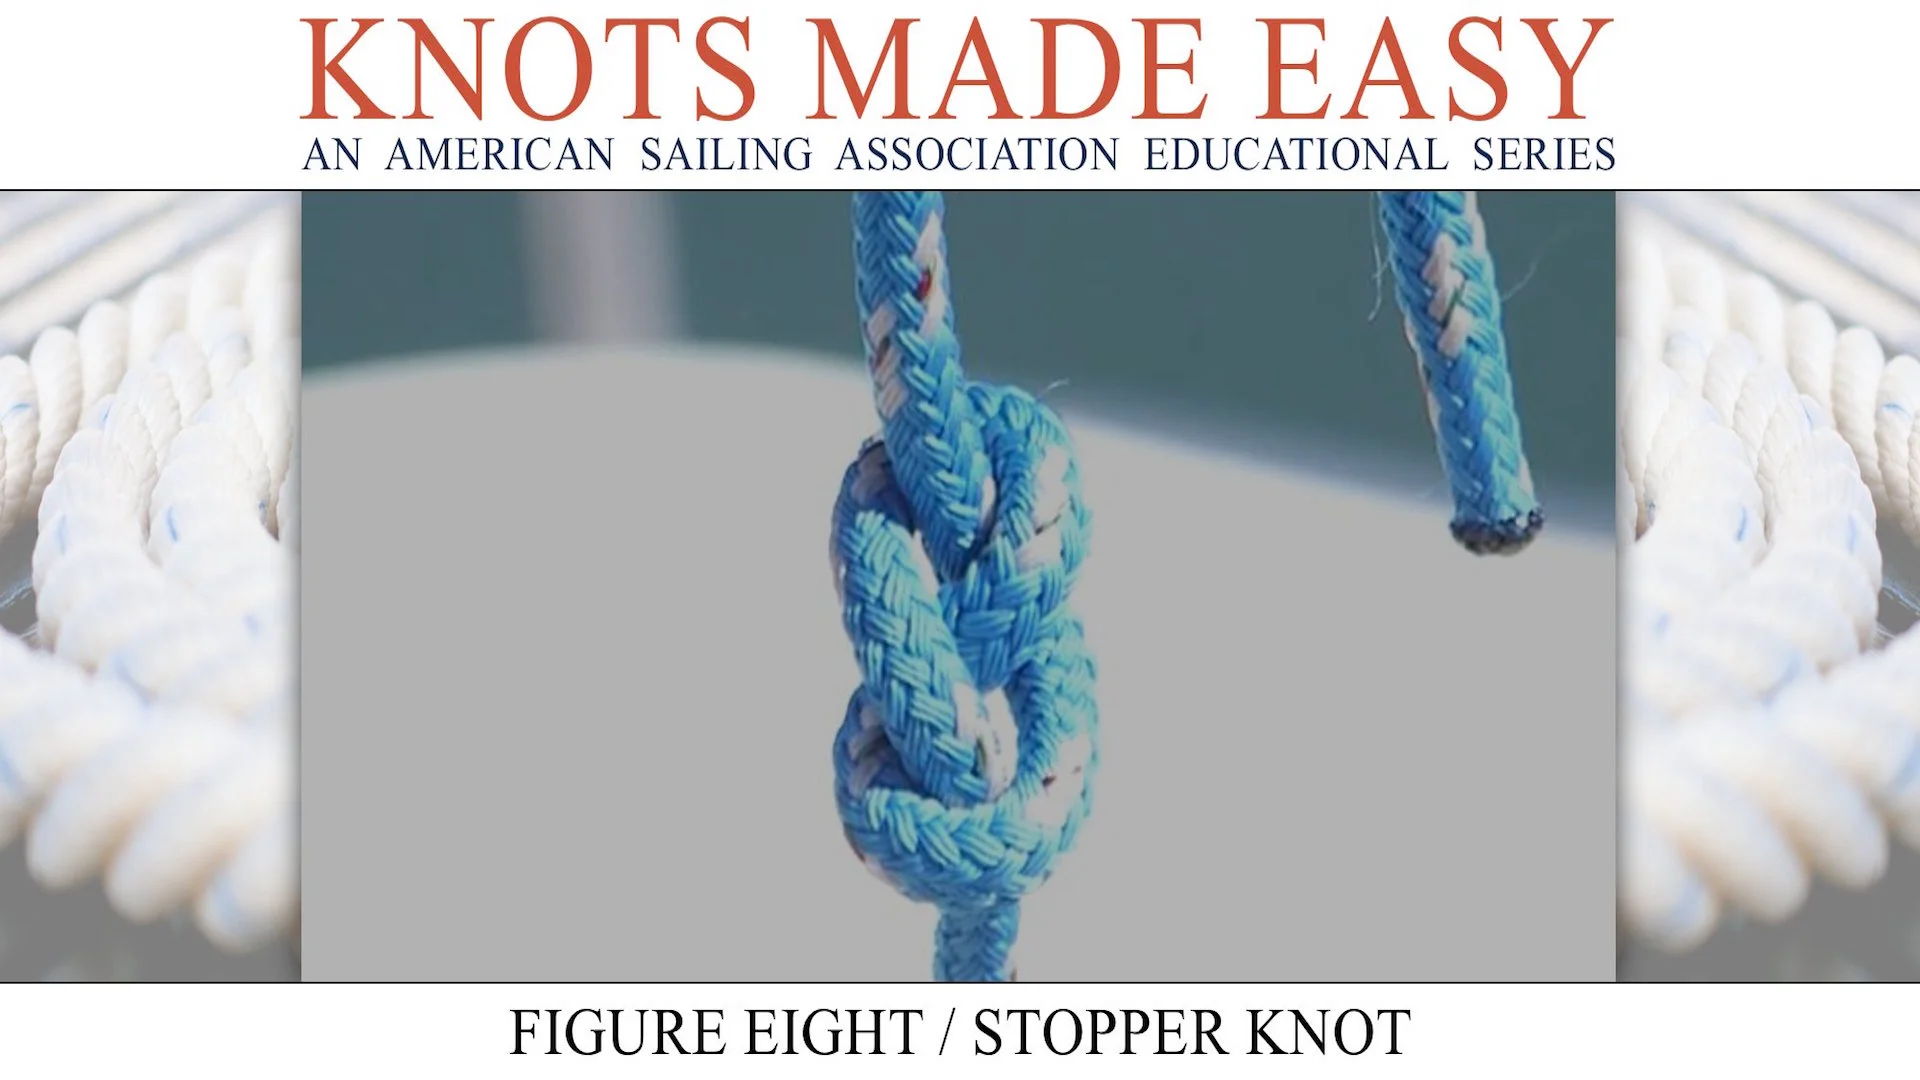 Film: Tying a figure of eight knot